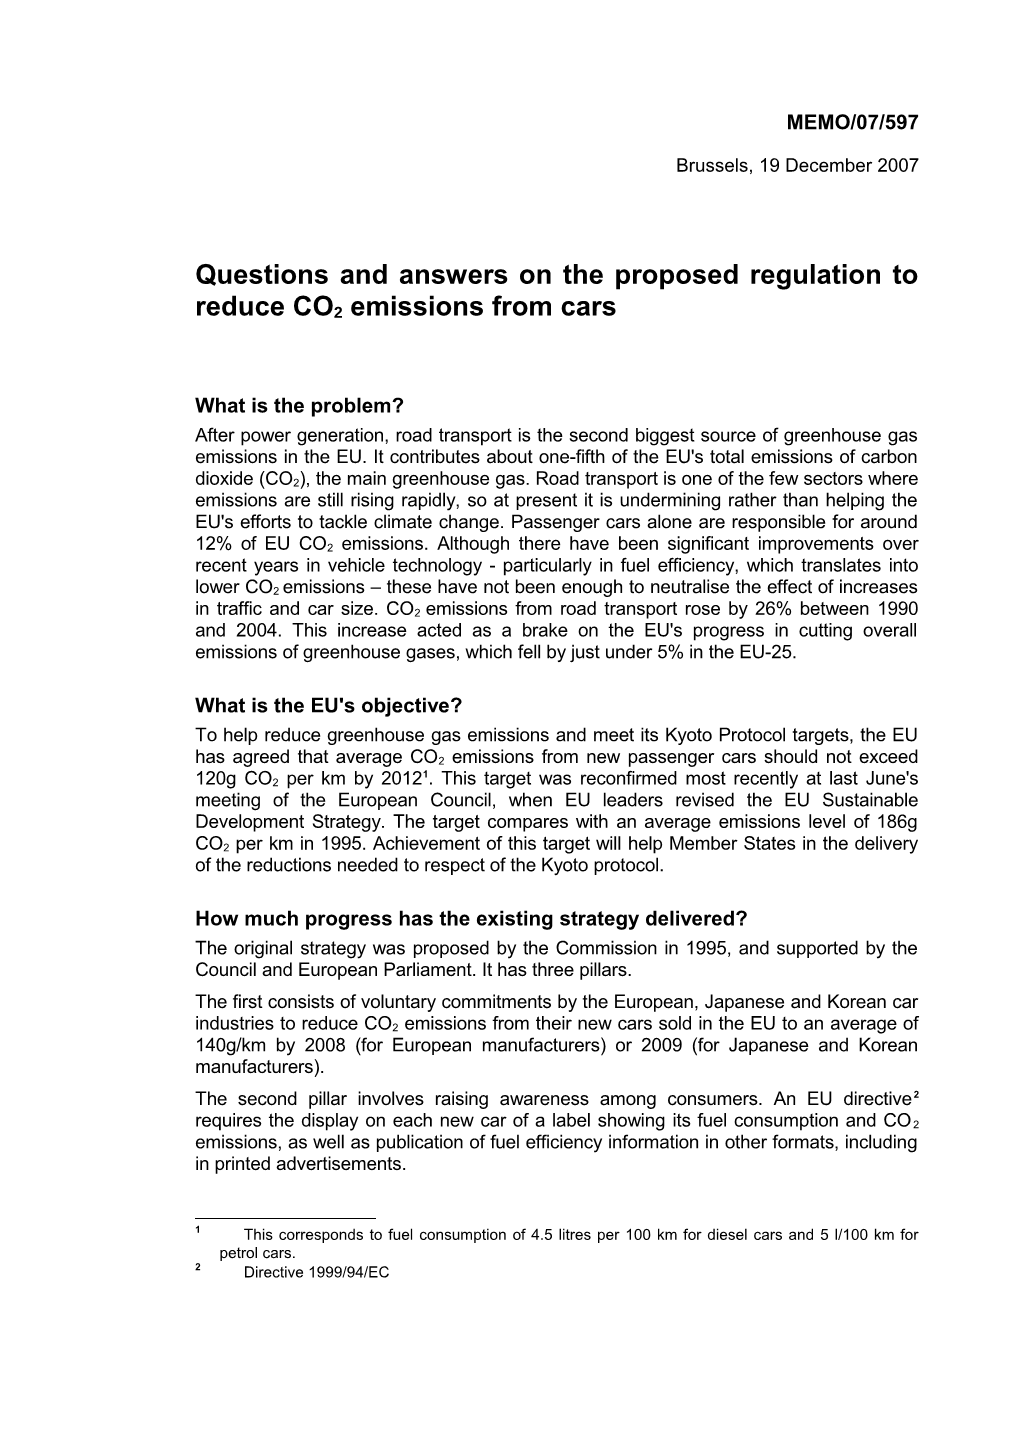 Questions and Answers on the Proposed Regulation to Reduce CO2 Emissions from Cars